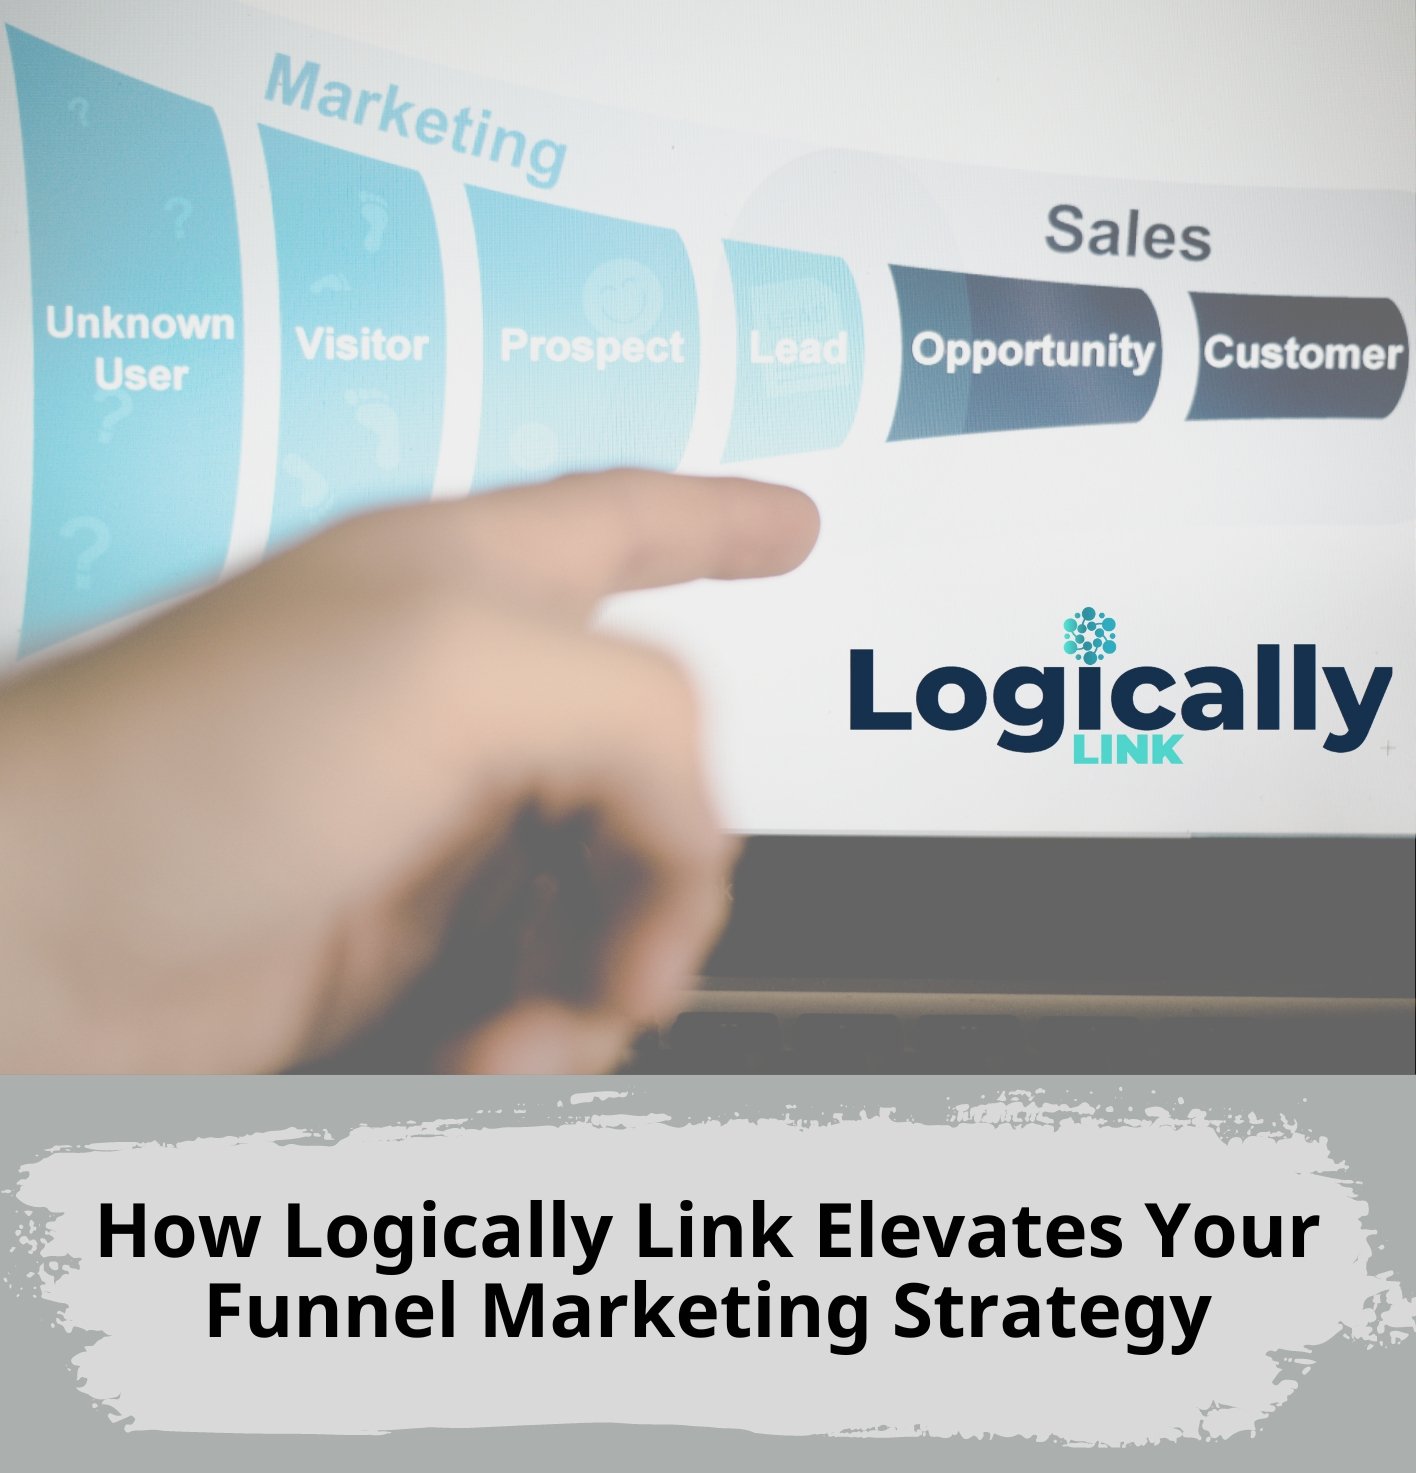 How Logically Link Elevates Your Funnel Marketing Strategy